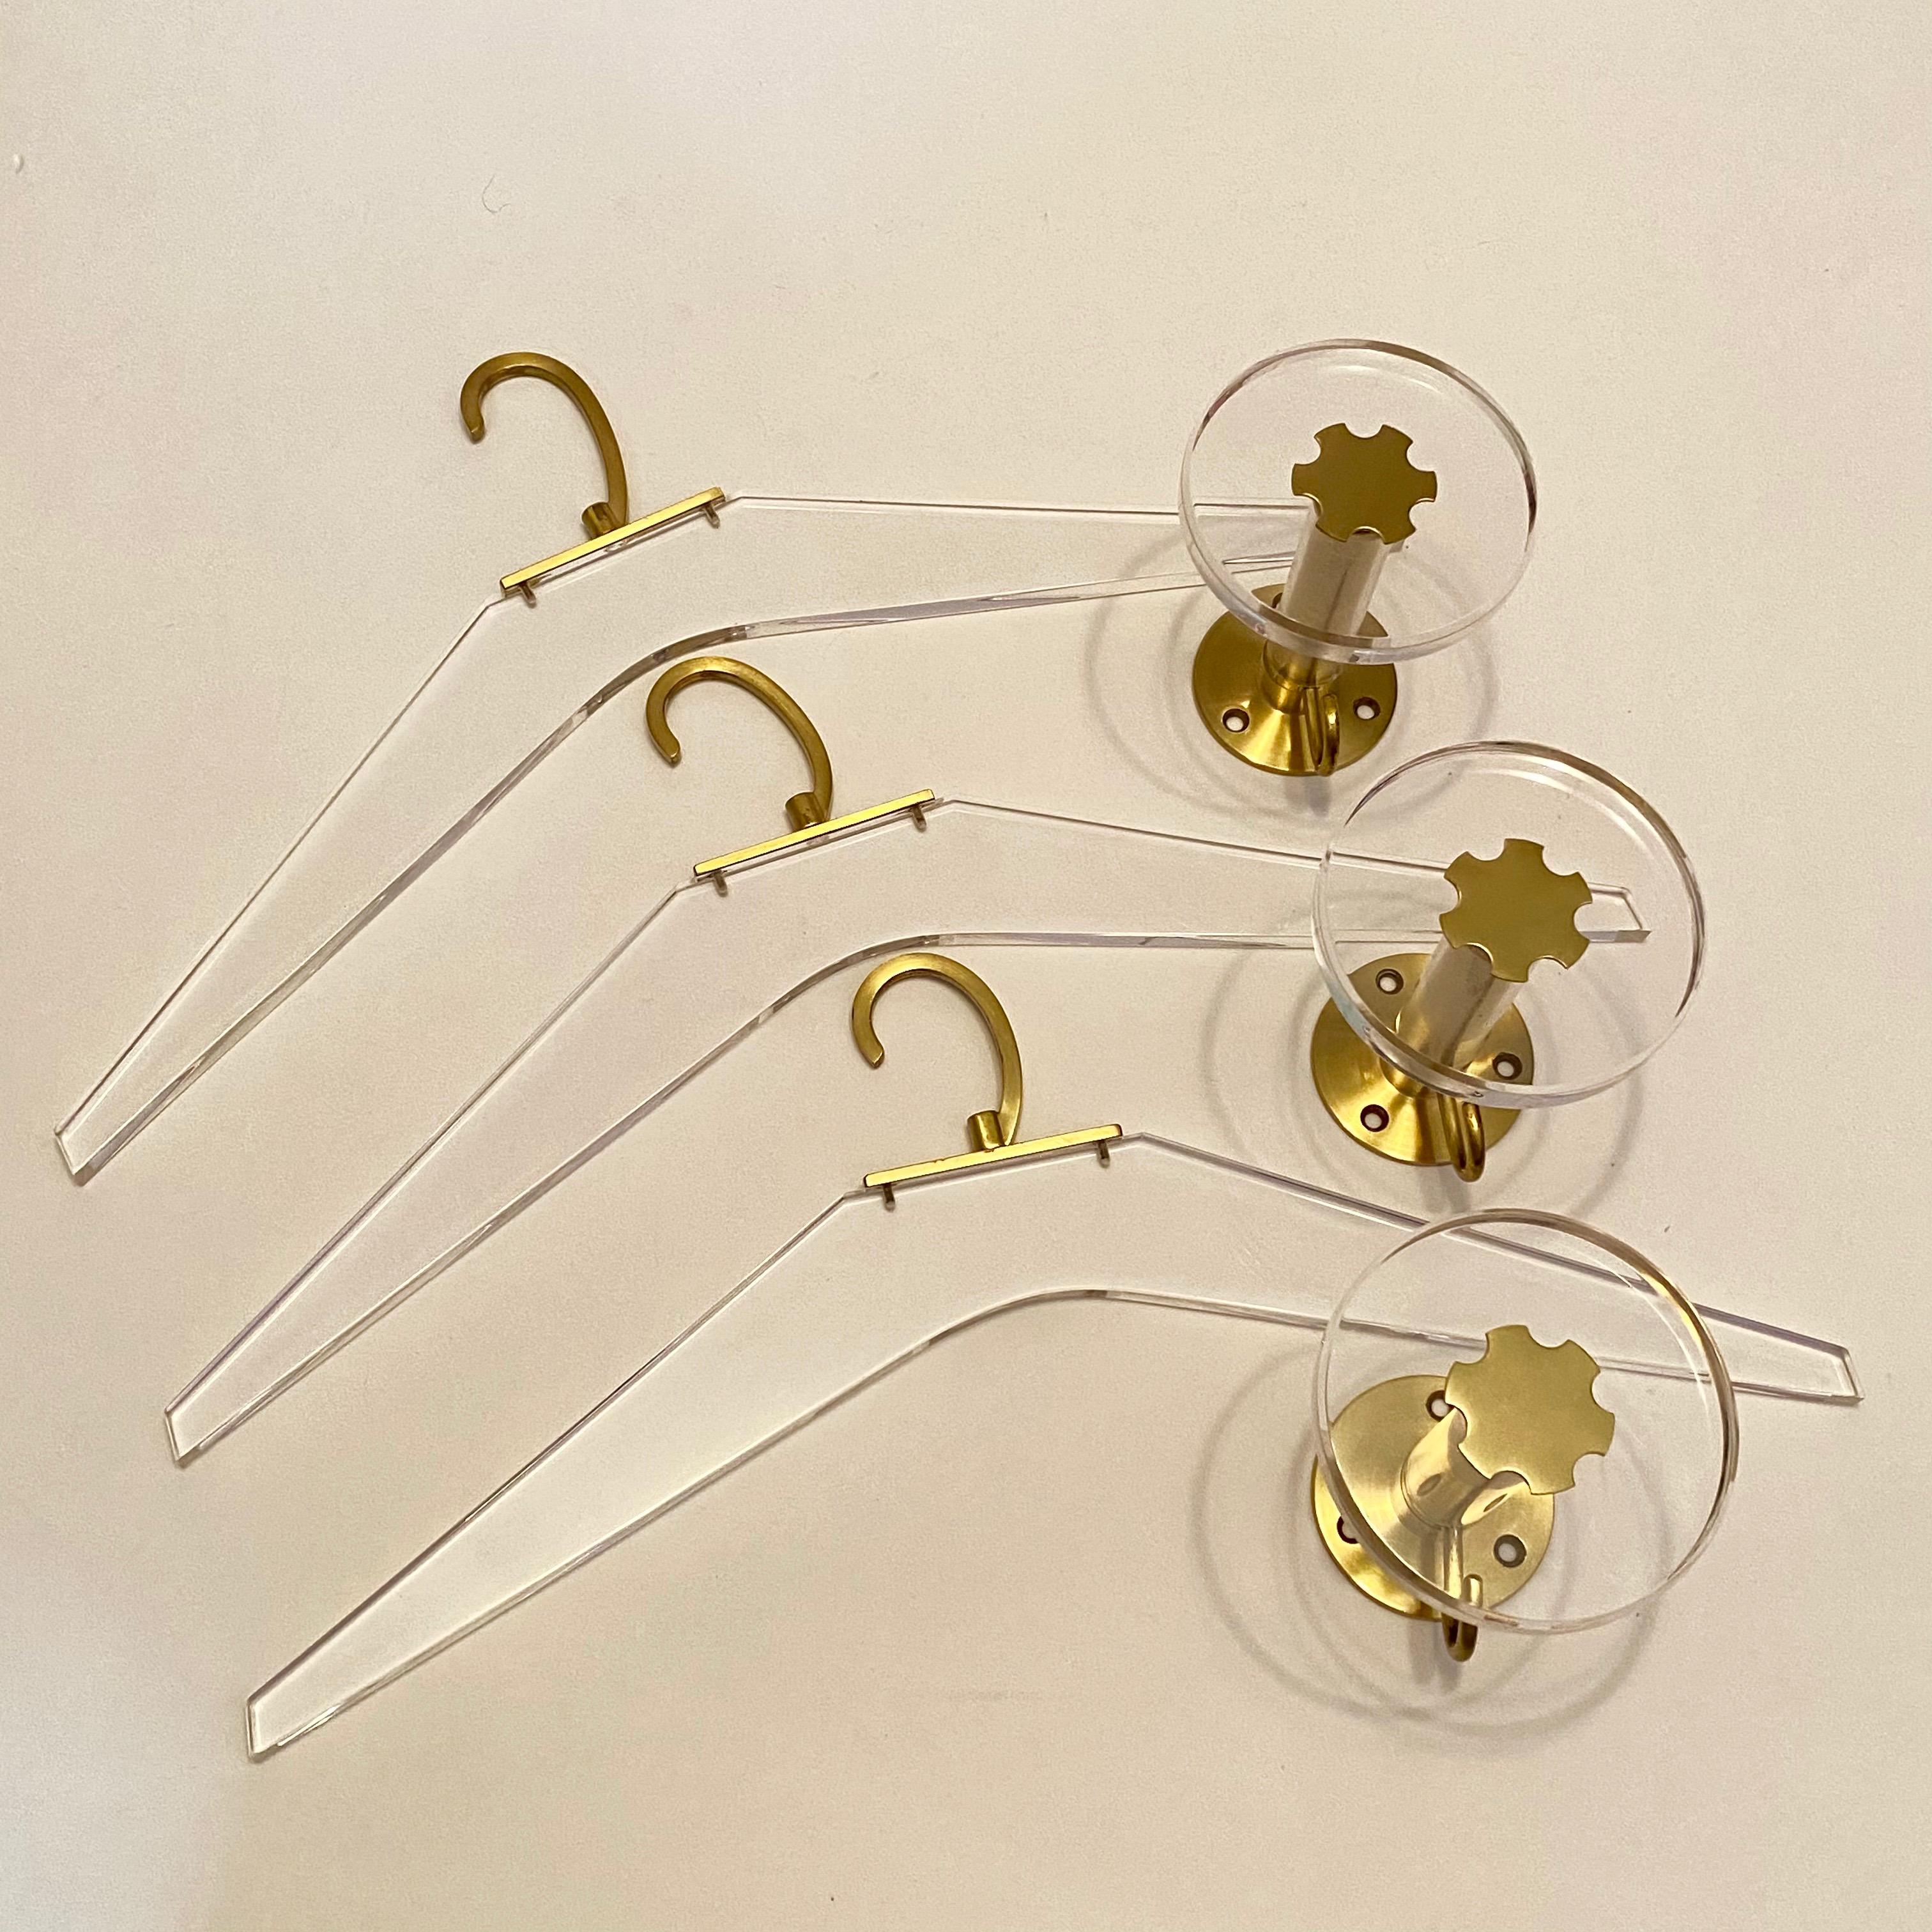 Lot of three coat hooks and cloth hanger, 1970s German. Nice addition to your room, entry hall or just for your collection of design items. Made of brass and Lucite. They are in used condition, with minor scratches and a nice patina. Coat hooks